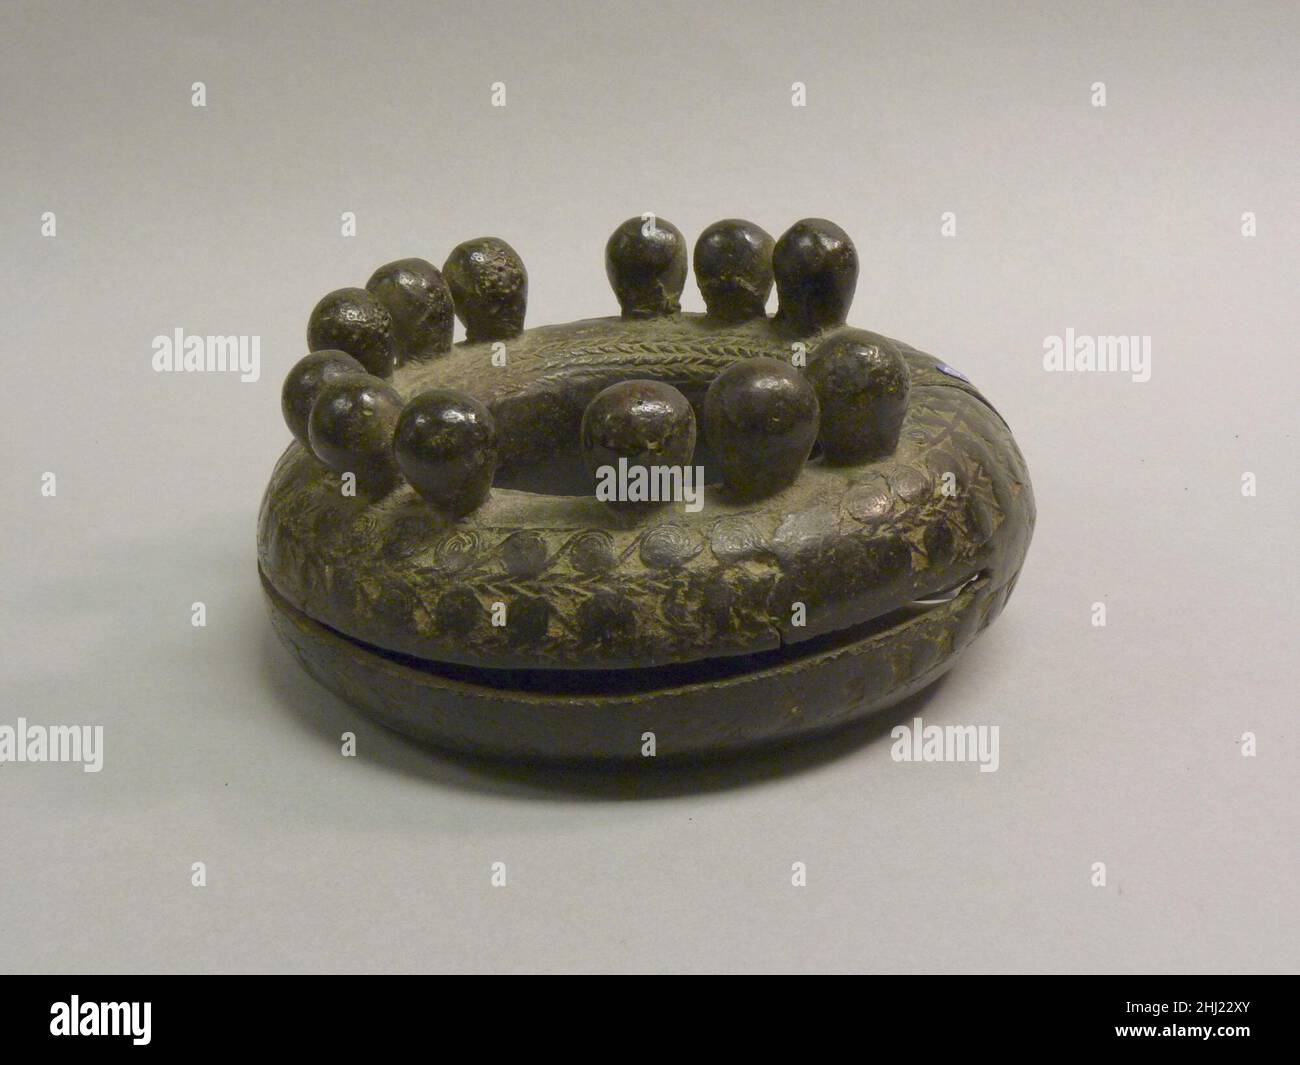 Anklet with Spheres on Top 500 B.C.–A.D. 300 Vietnam. Anklet with Spheres on Top  53356 Vietnam, Anklet with Spheres on Top, 500 B.C.?A.D. 300, Bronze, H. 3 in. (7.6 cm); Diam. 6 1/4 in. (15.9 cm). The Metropolitan Museum of Art, New York. Samuel Eilenberg Collection, Bequest of Samuel Eilenberg, 1998 (2001.433.321) Stock Photo